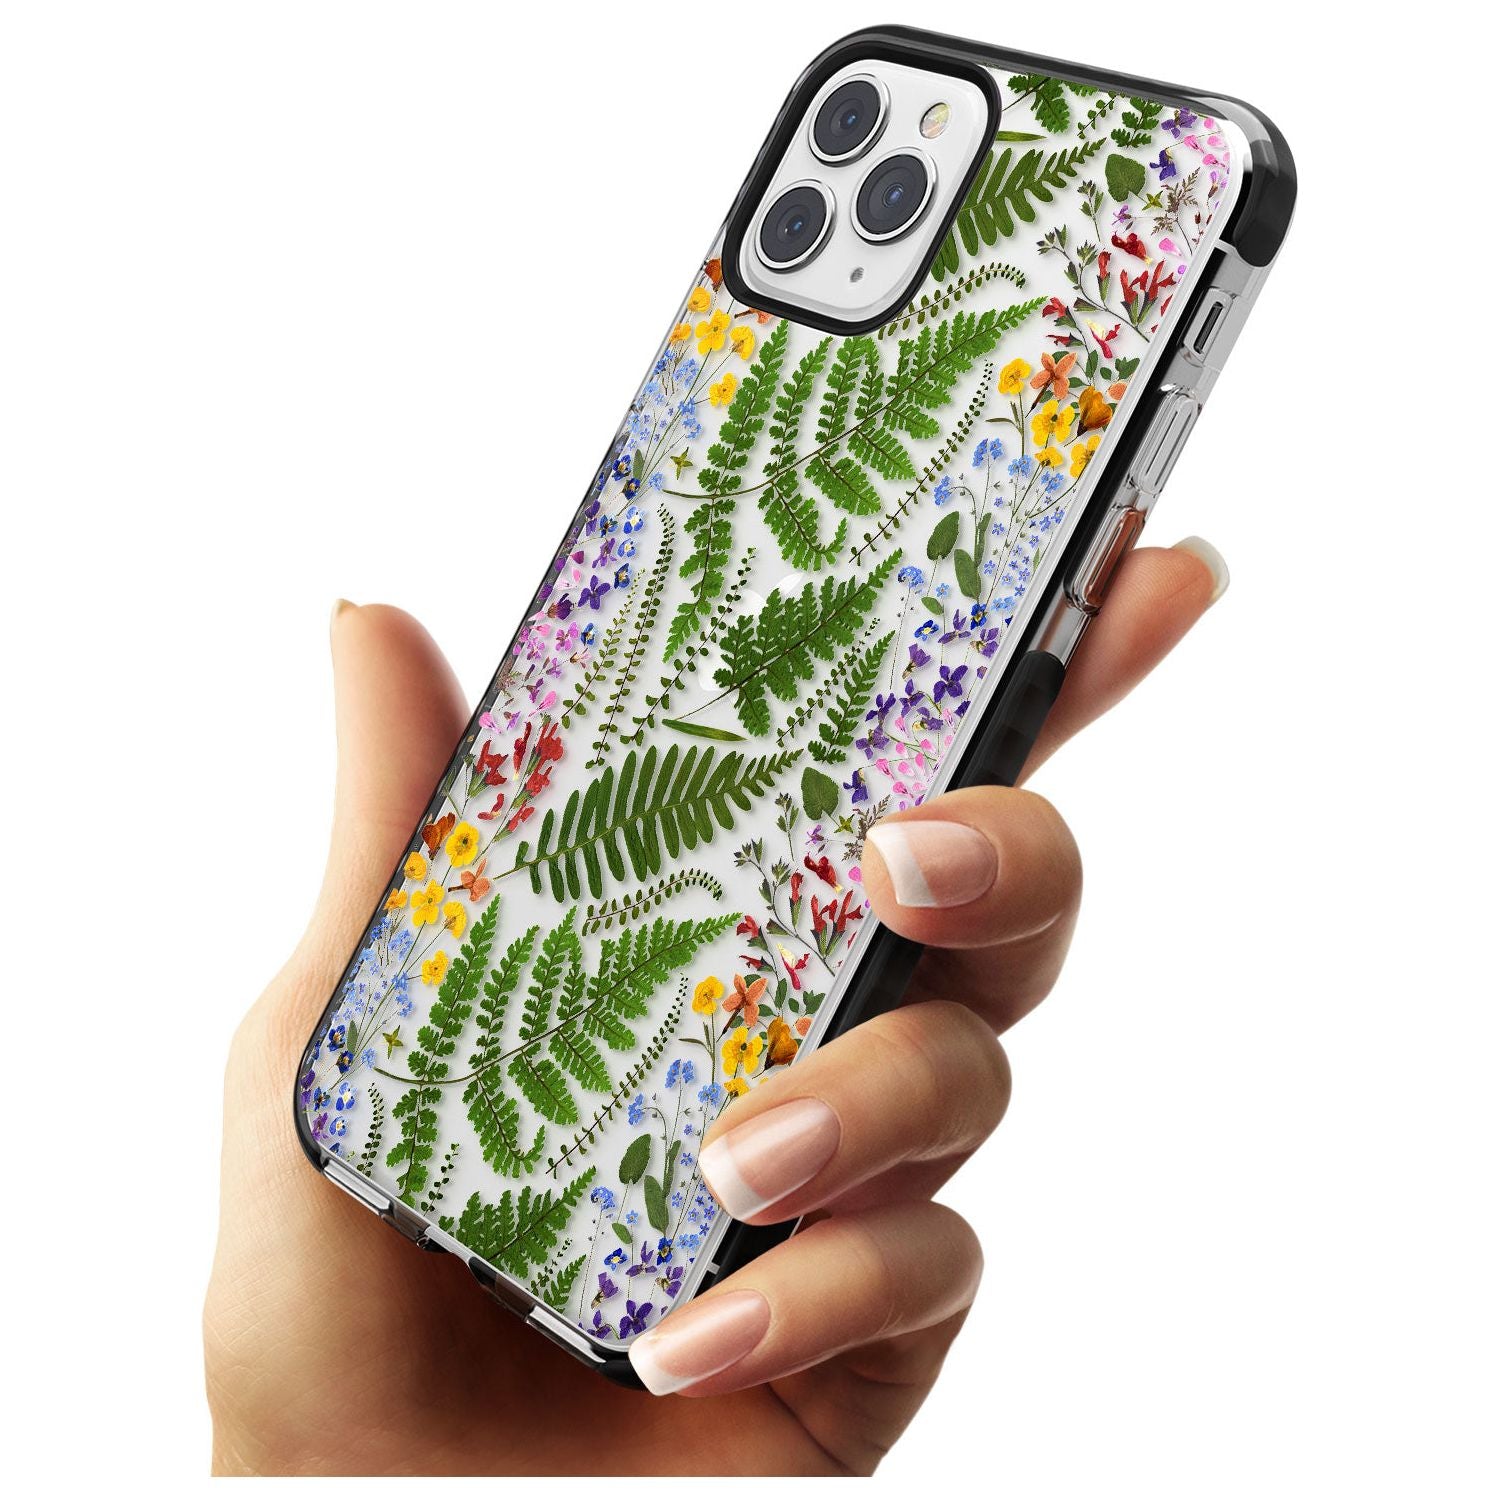 Busy Floral and Fern Design Black Impact Phone Case for iPhone 11 Pro Max